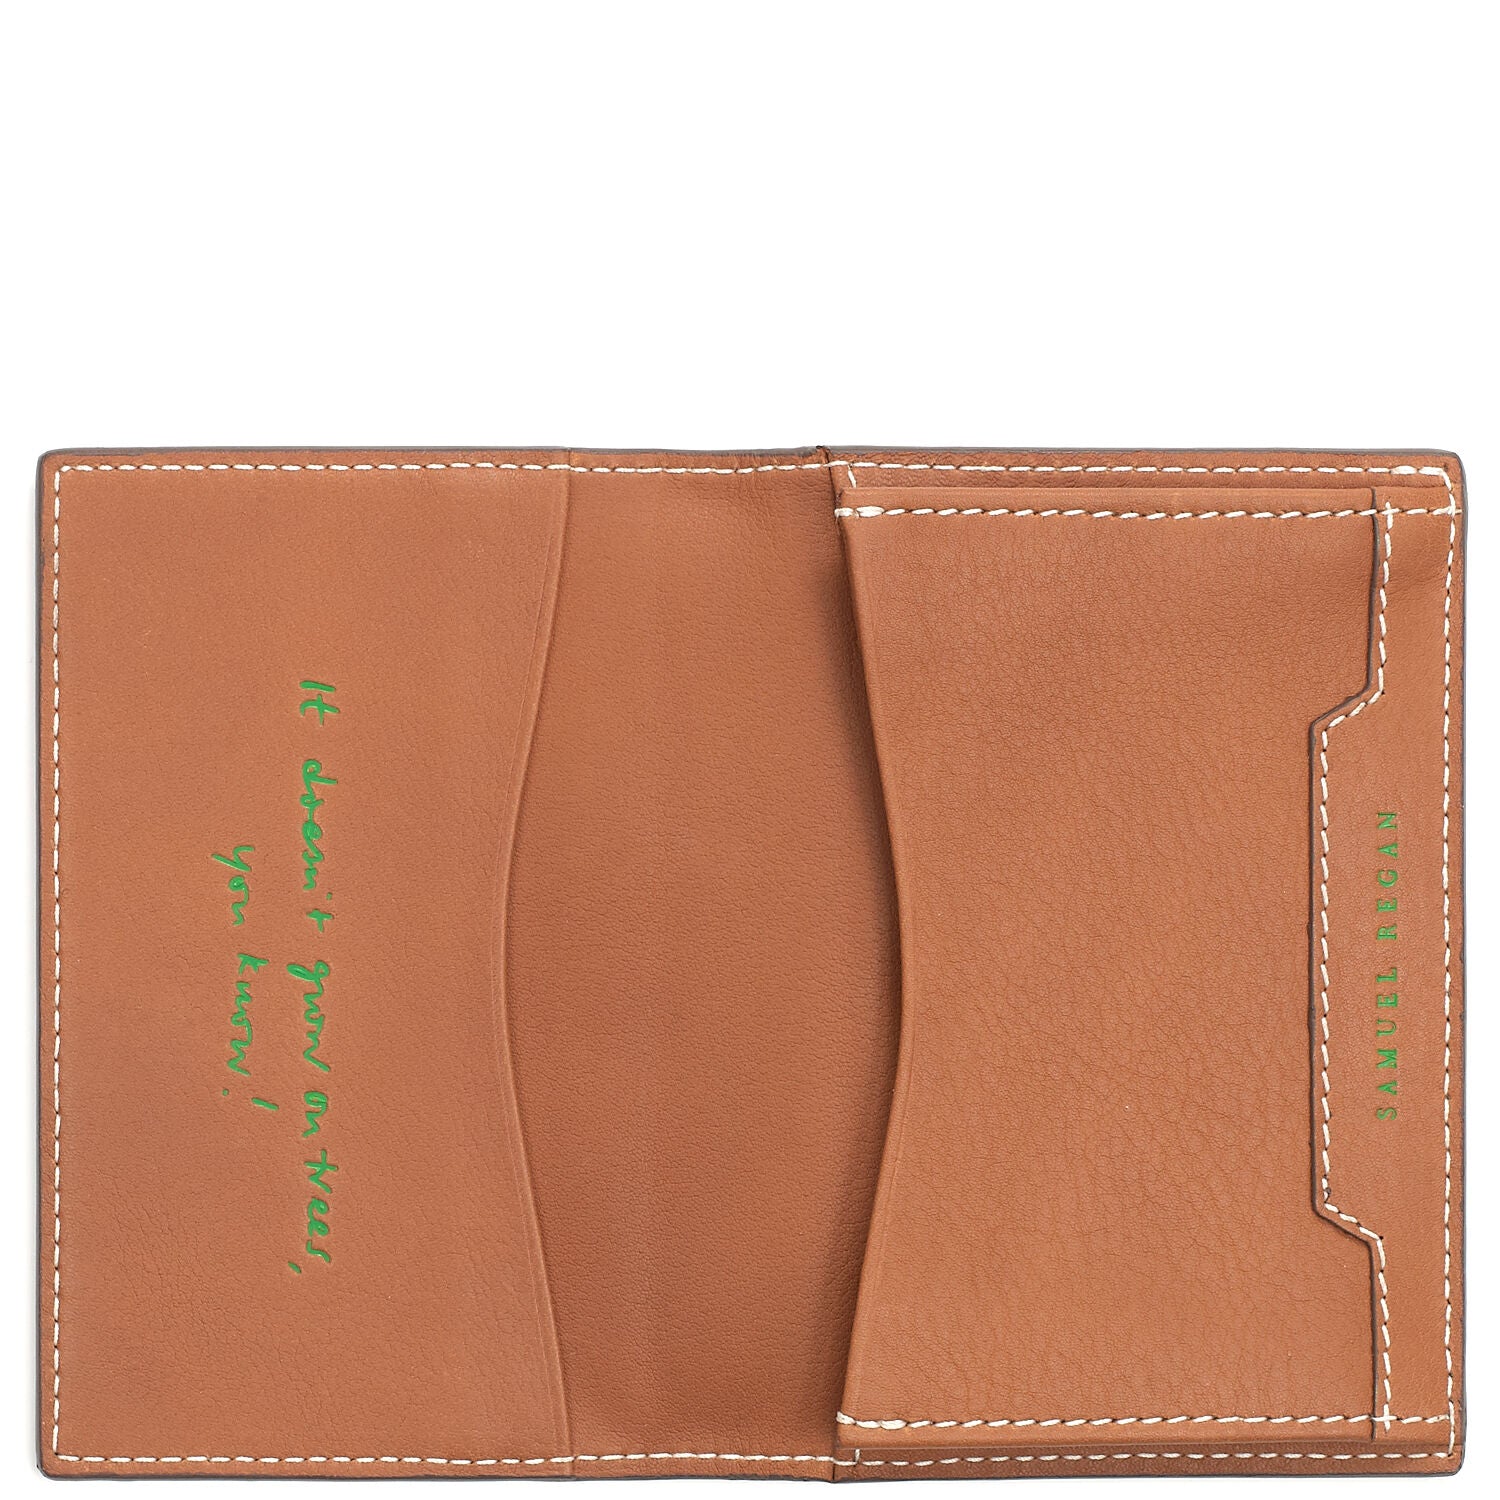 Bespoke Folded Card Case -

                  
                    Butter Leather in Tan -
                  

                  Anya Hindmarch UK
